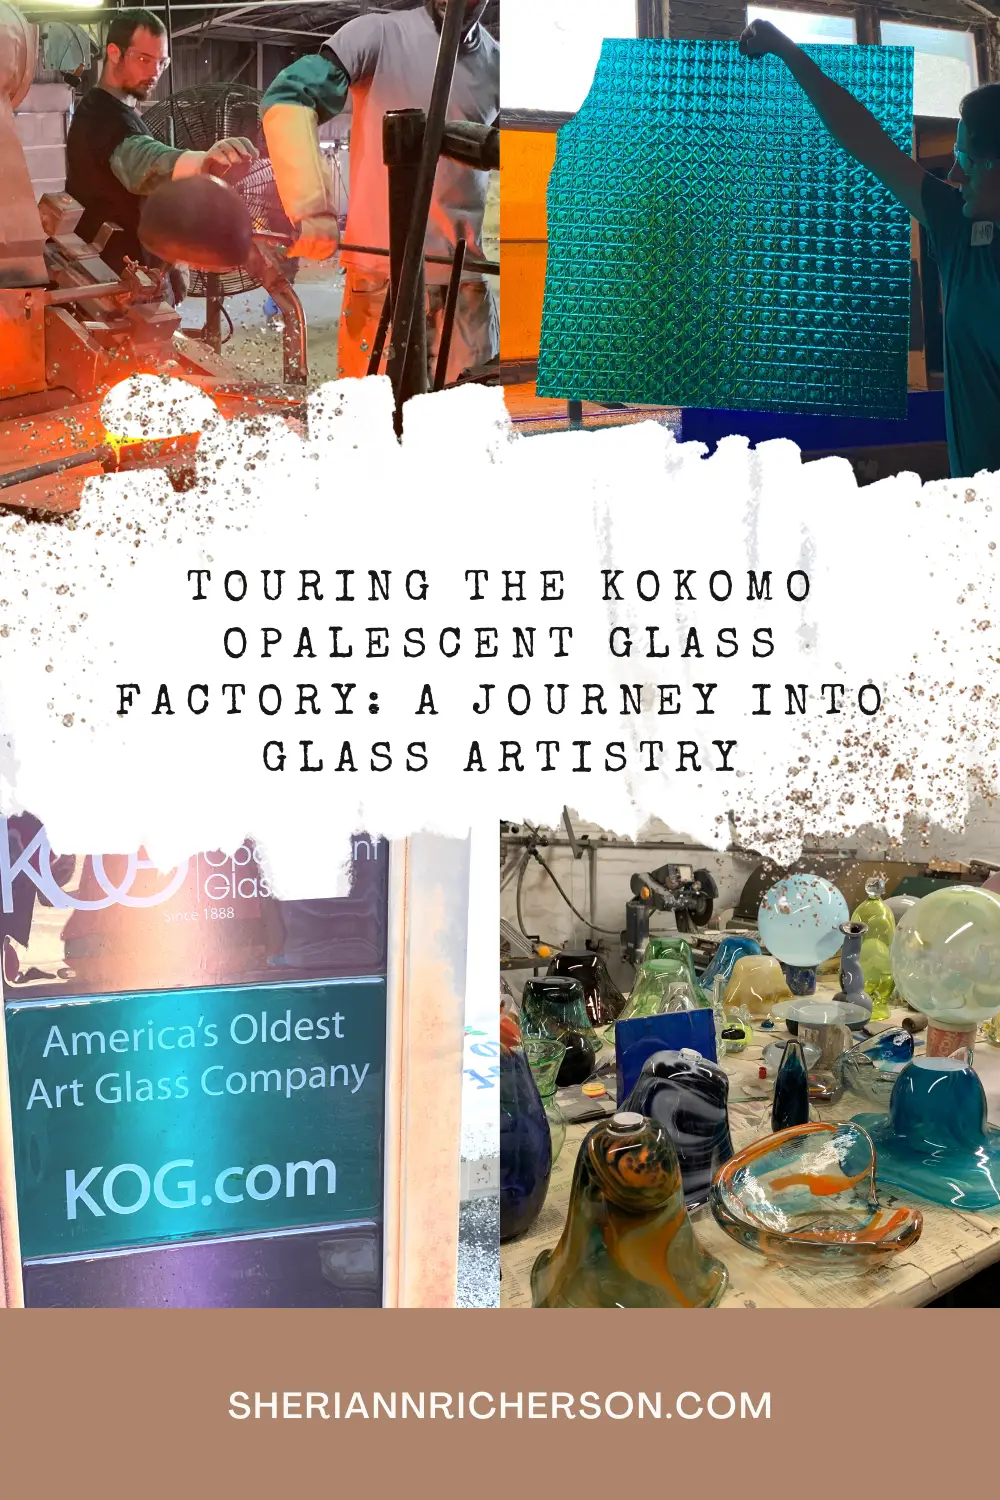 Images taken during the tour of the Kokomo Opalescent Glass Factory.